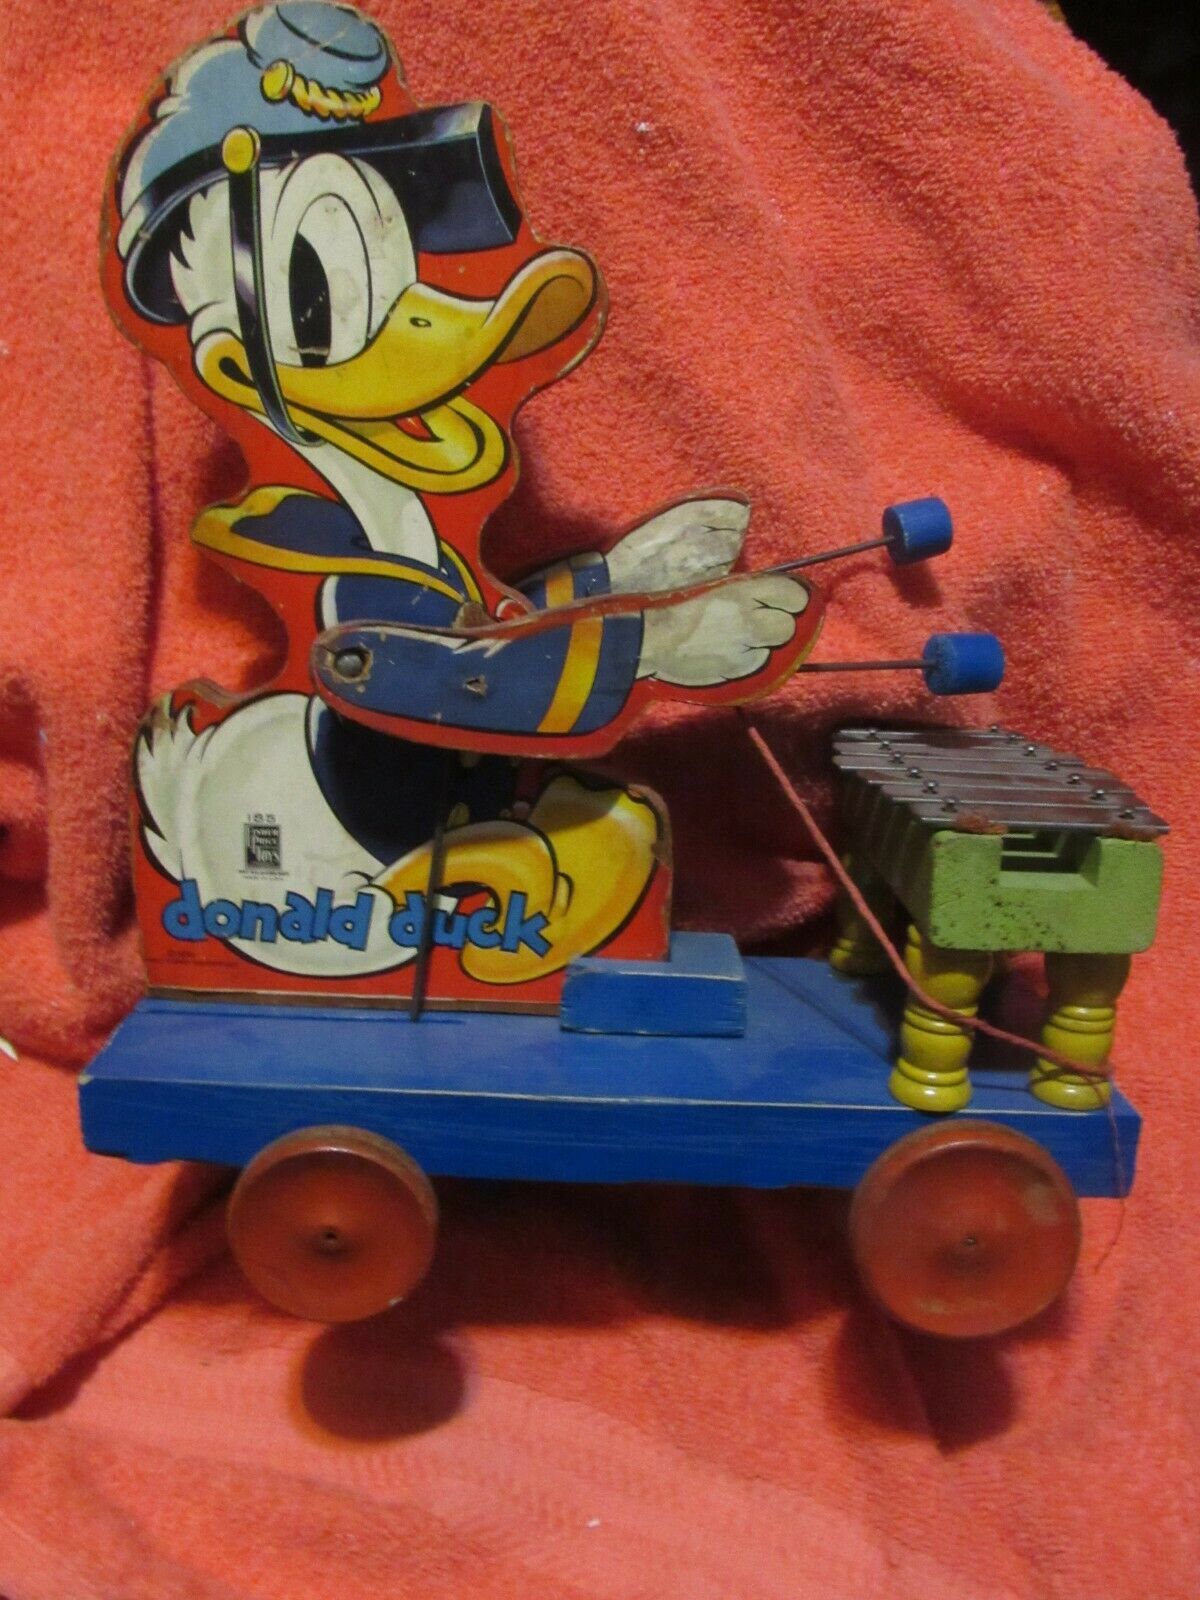 Vintage Original 1938 Fisher Price Donald Duck Xylephone #185 Pull Toy